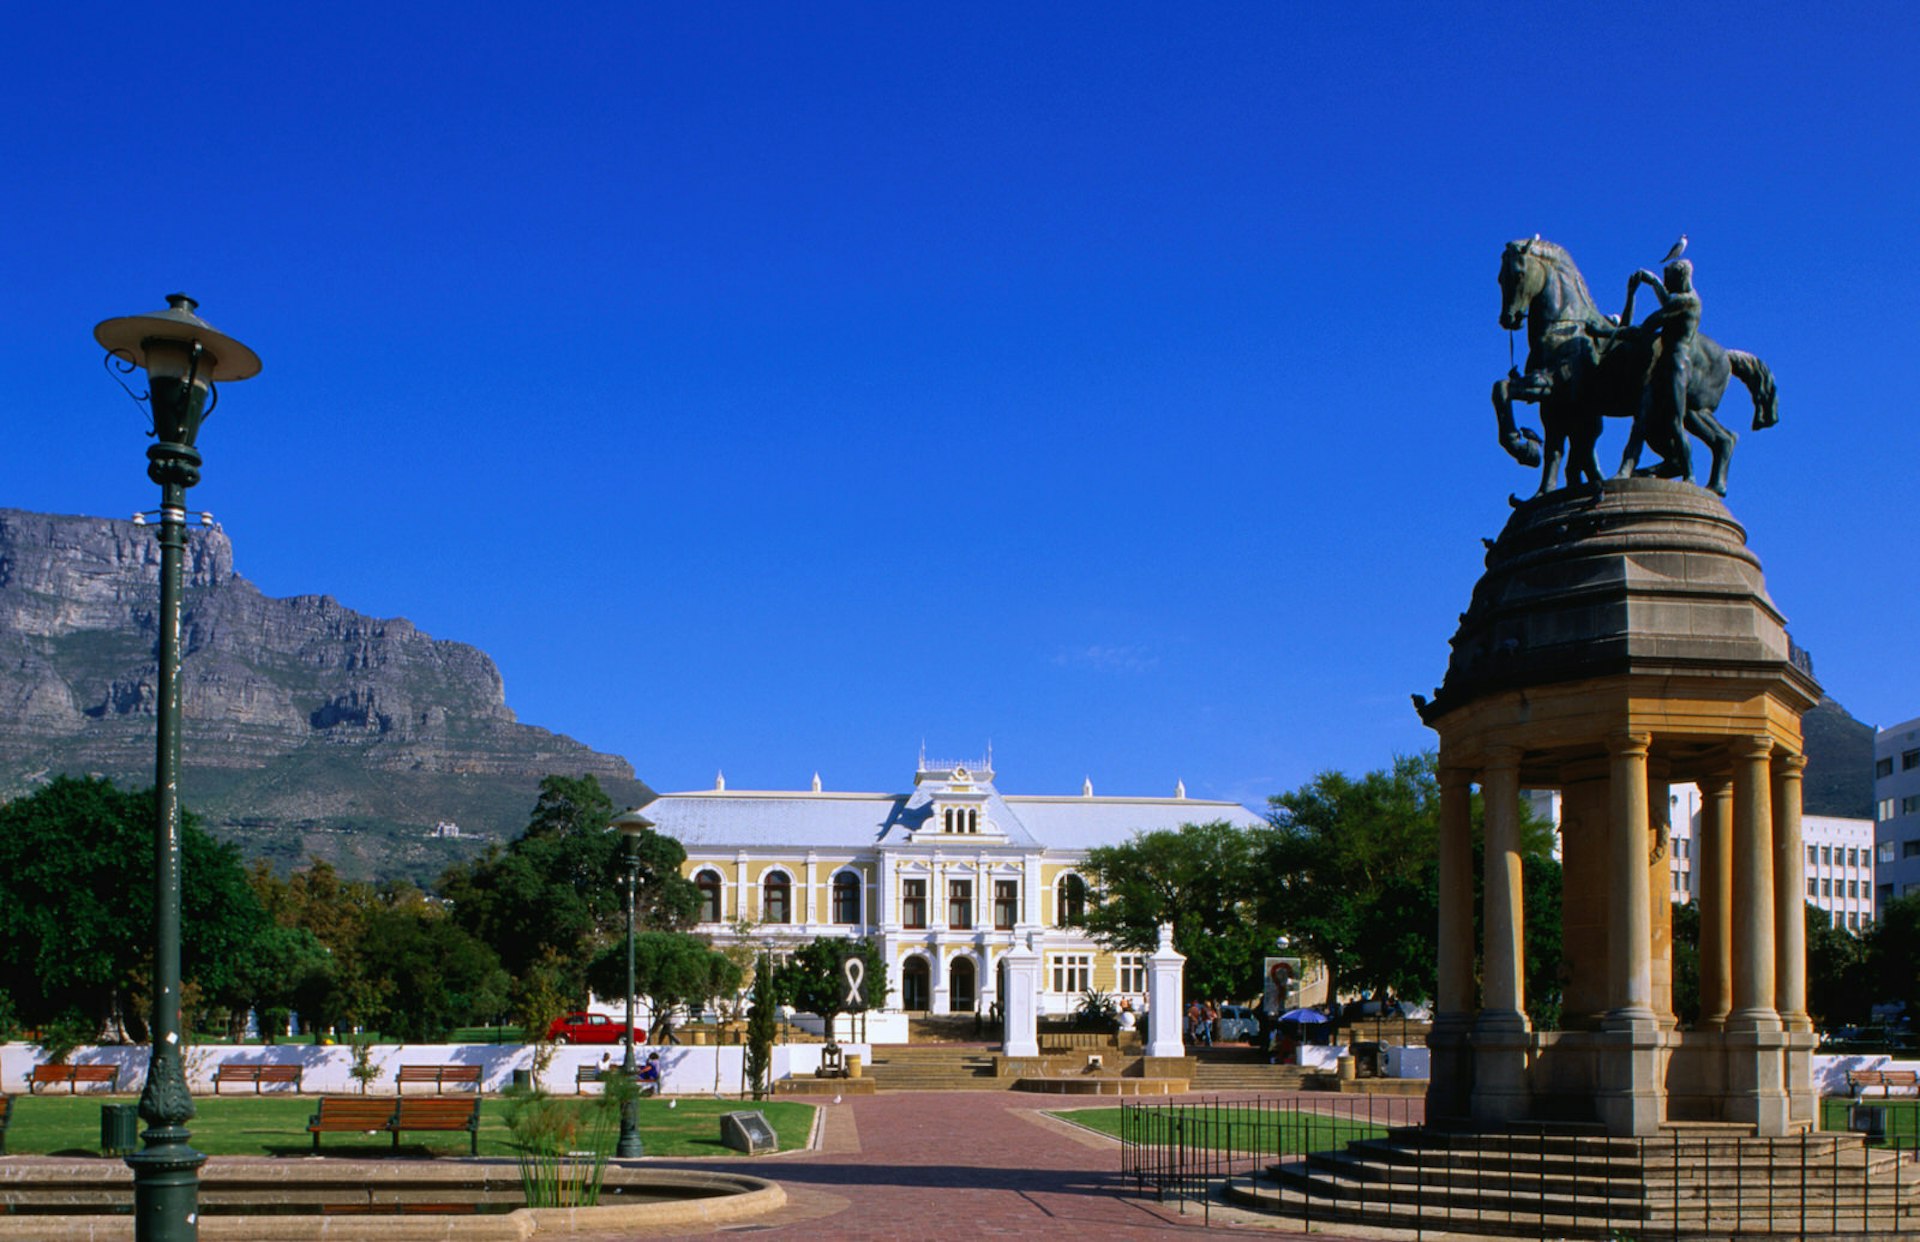 Beneath a backdrop of Table Mountain is Company's Garden, a manicured lawn with paved paths, monuments and the South African Museum © Ariadne Van Zandbergen / Lonely Planet